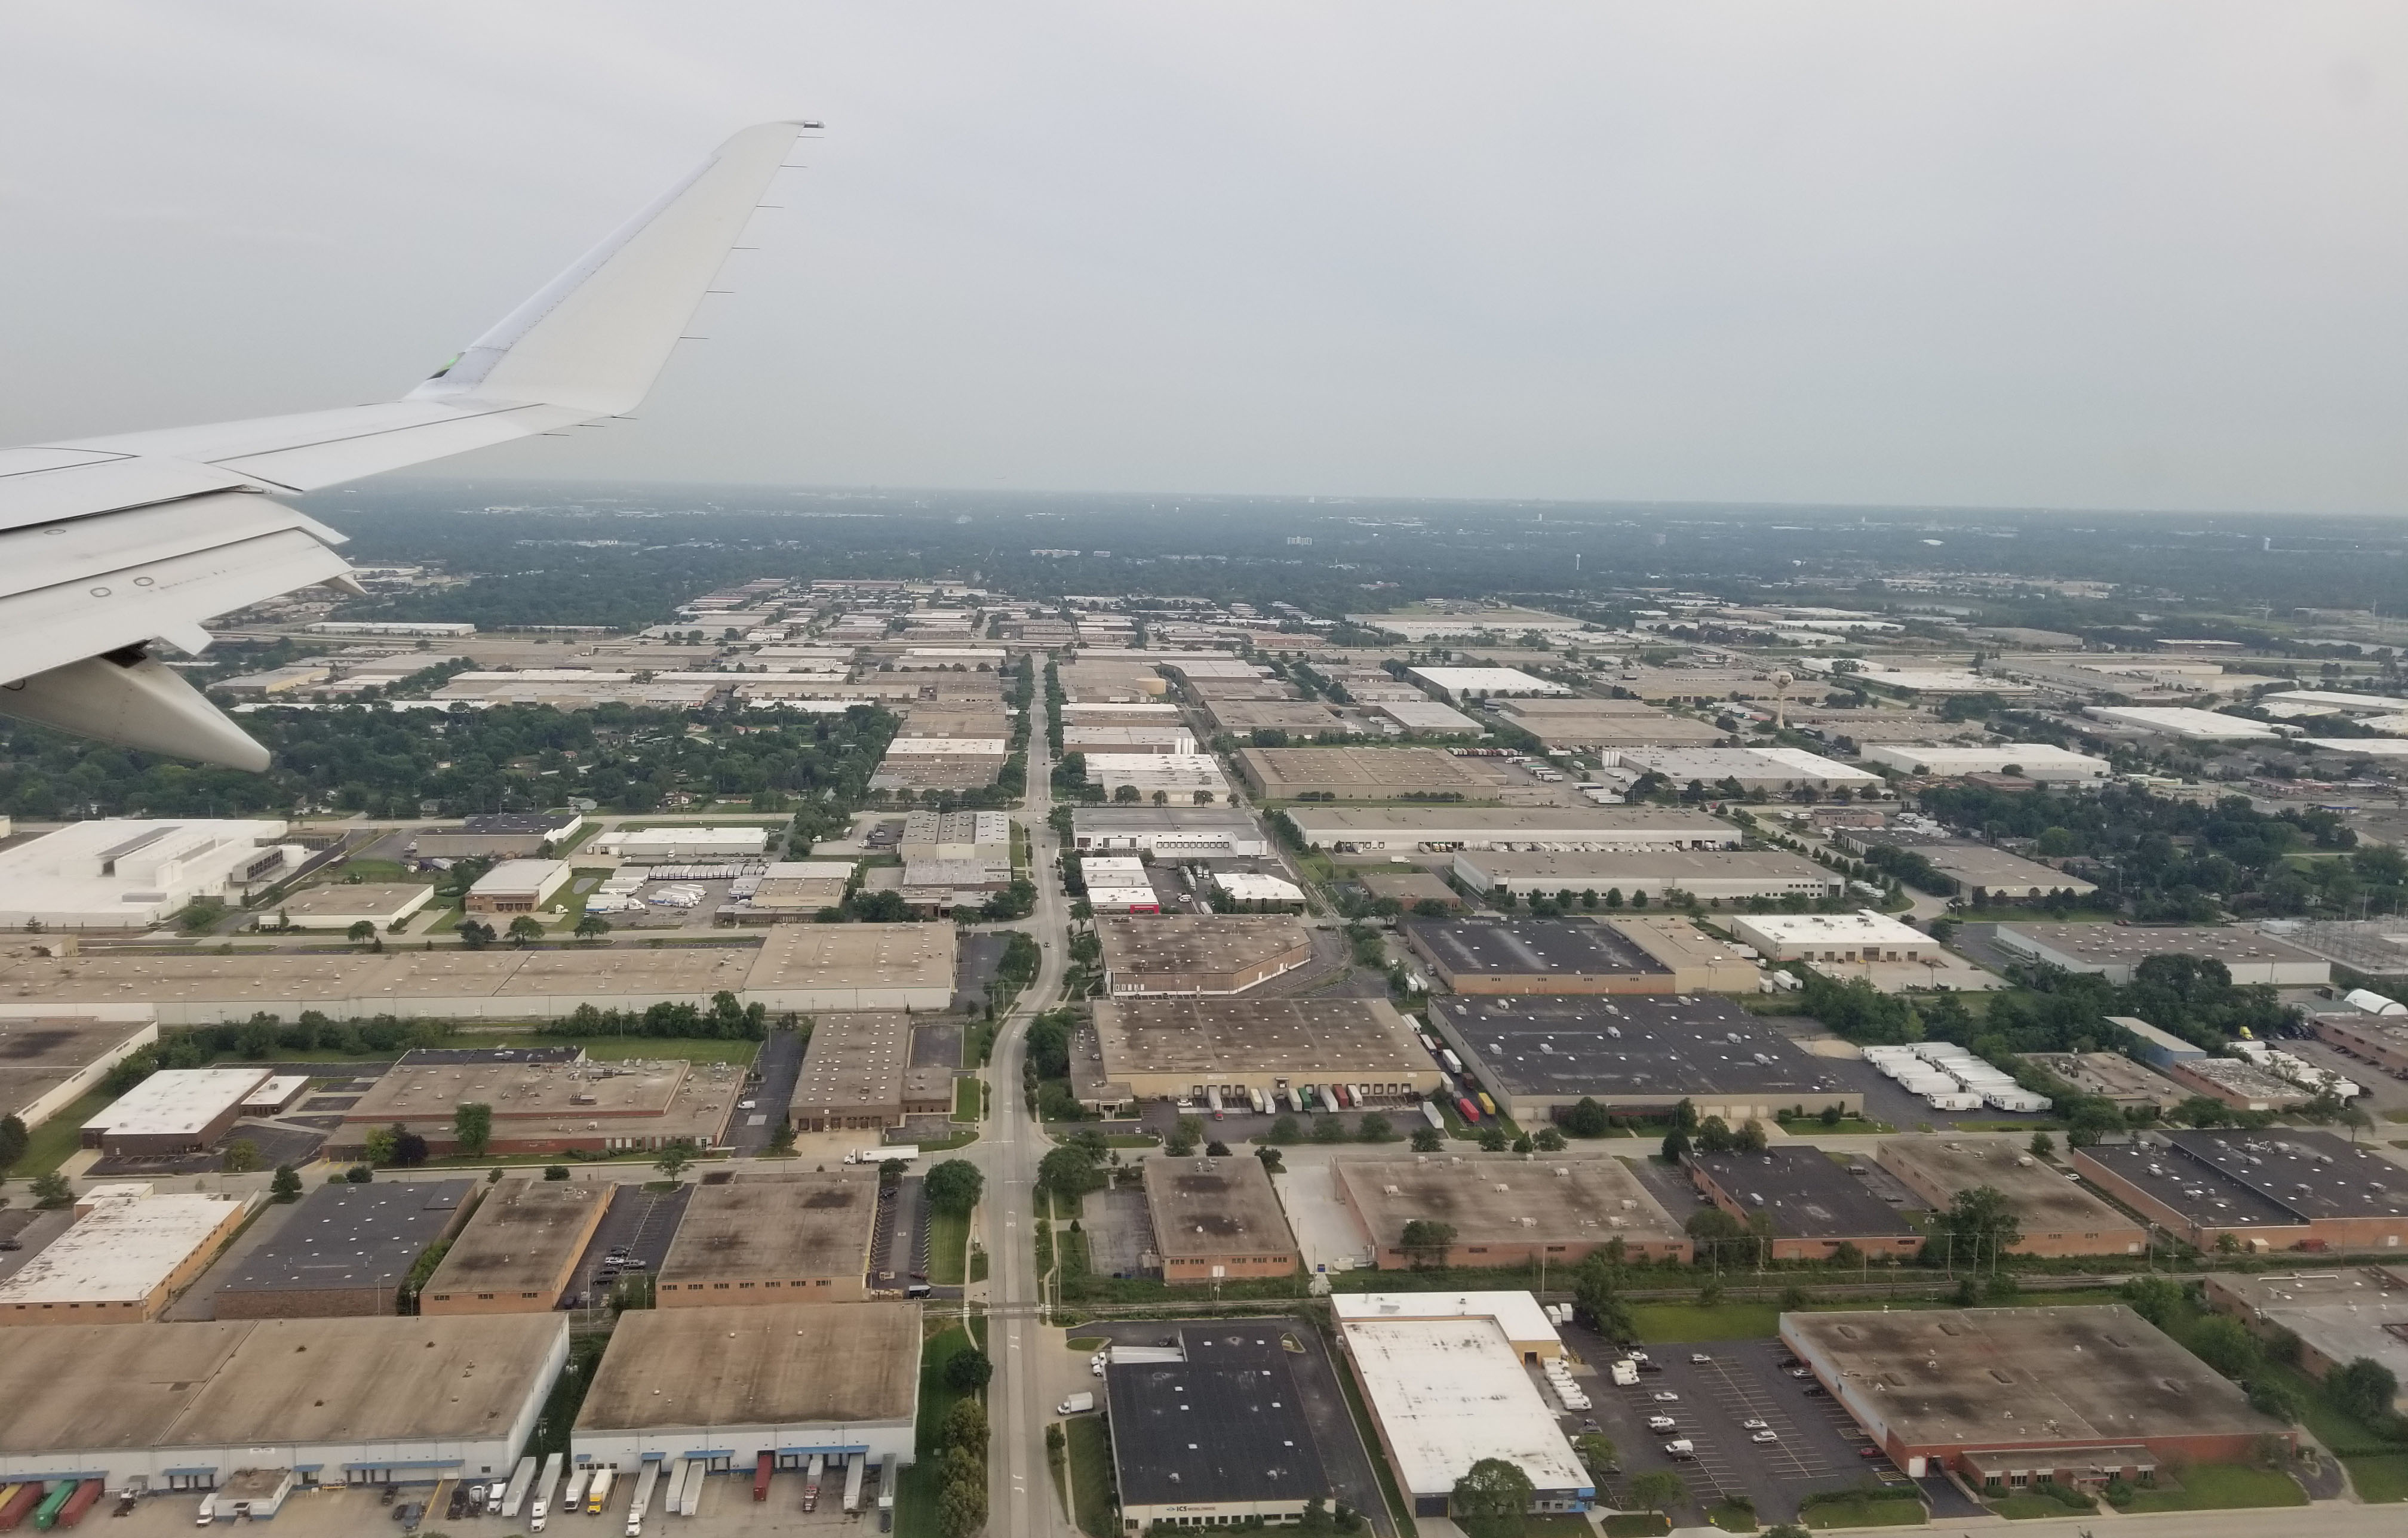 Takeoff from Chicago O'Hare International Aiport